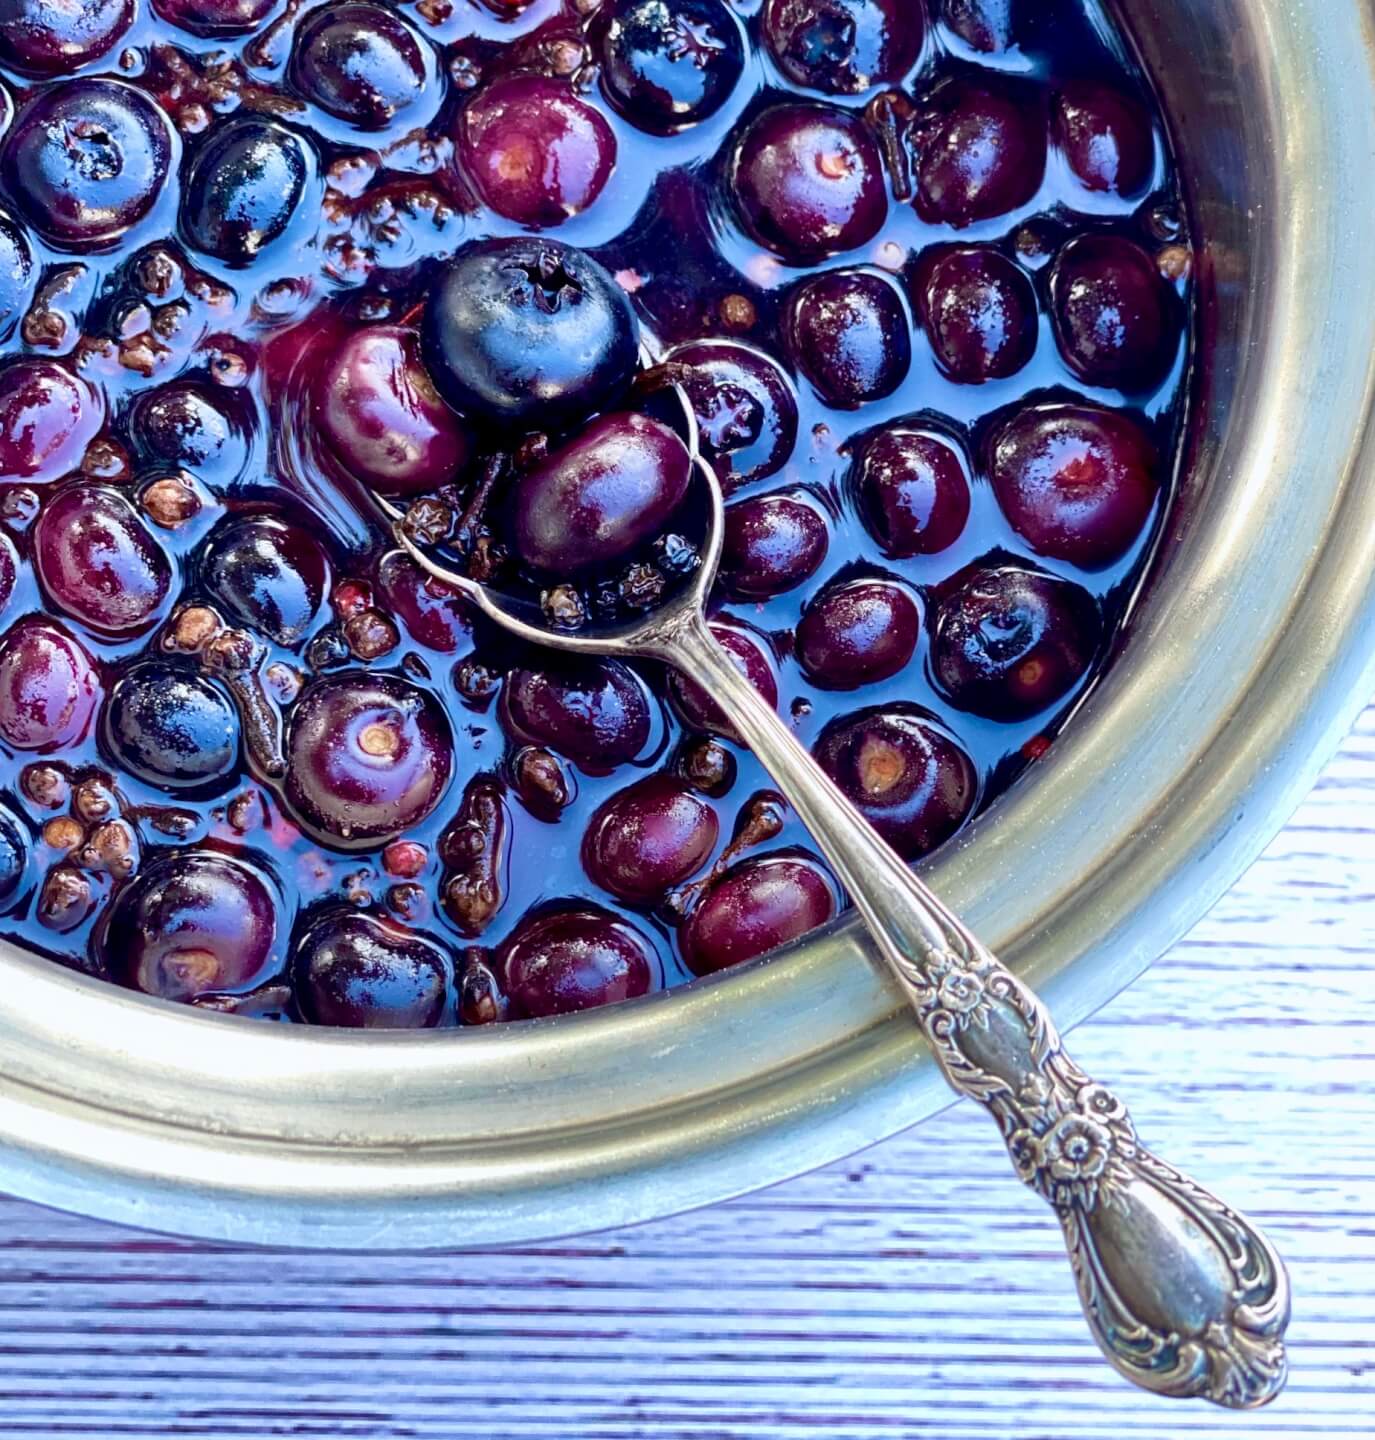 Pickled Blueberries - Wish Farms